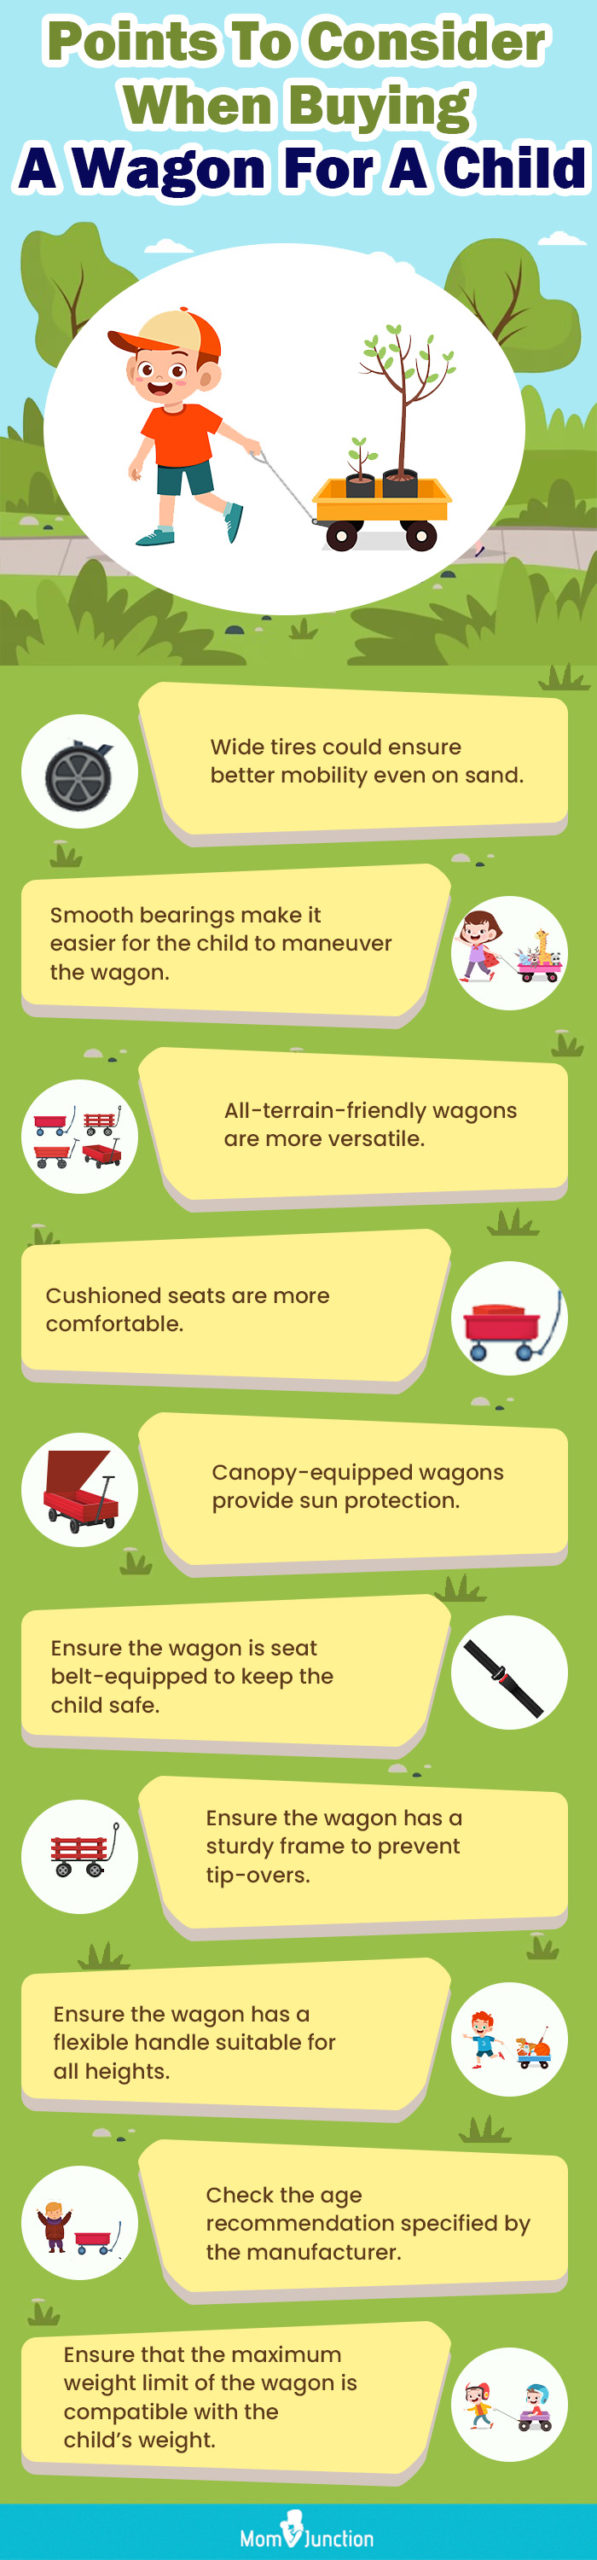  Points To Consider When Buying A Wagon For A Child (infographic)